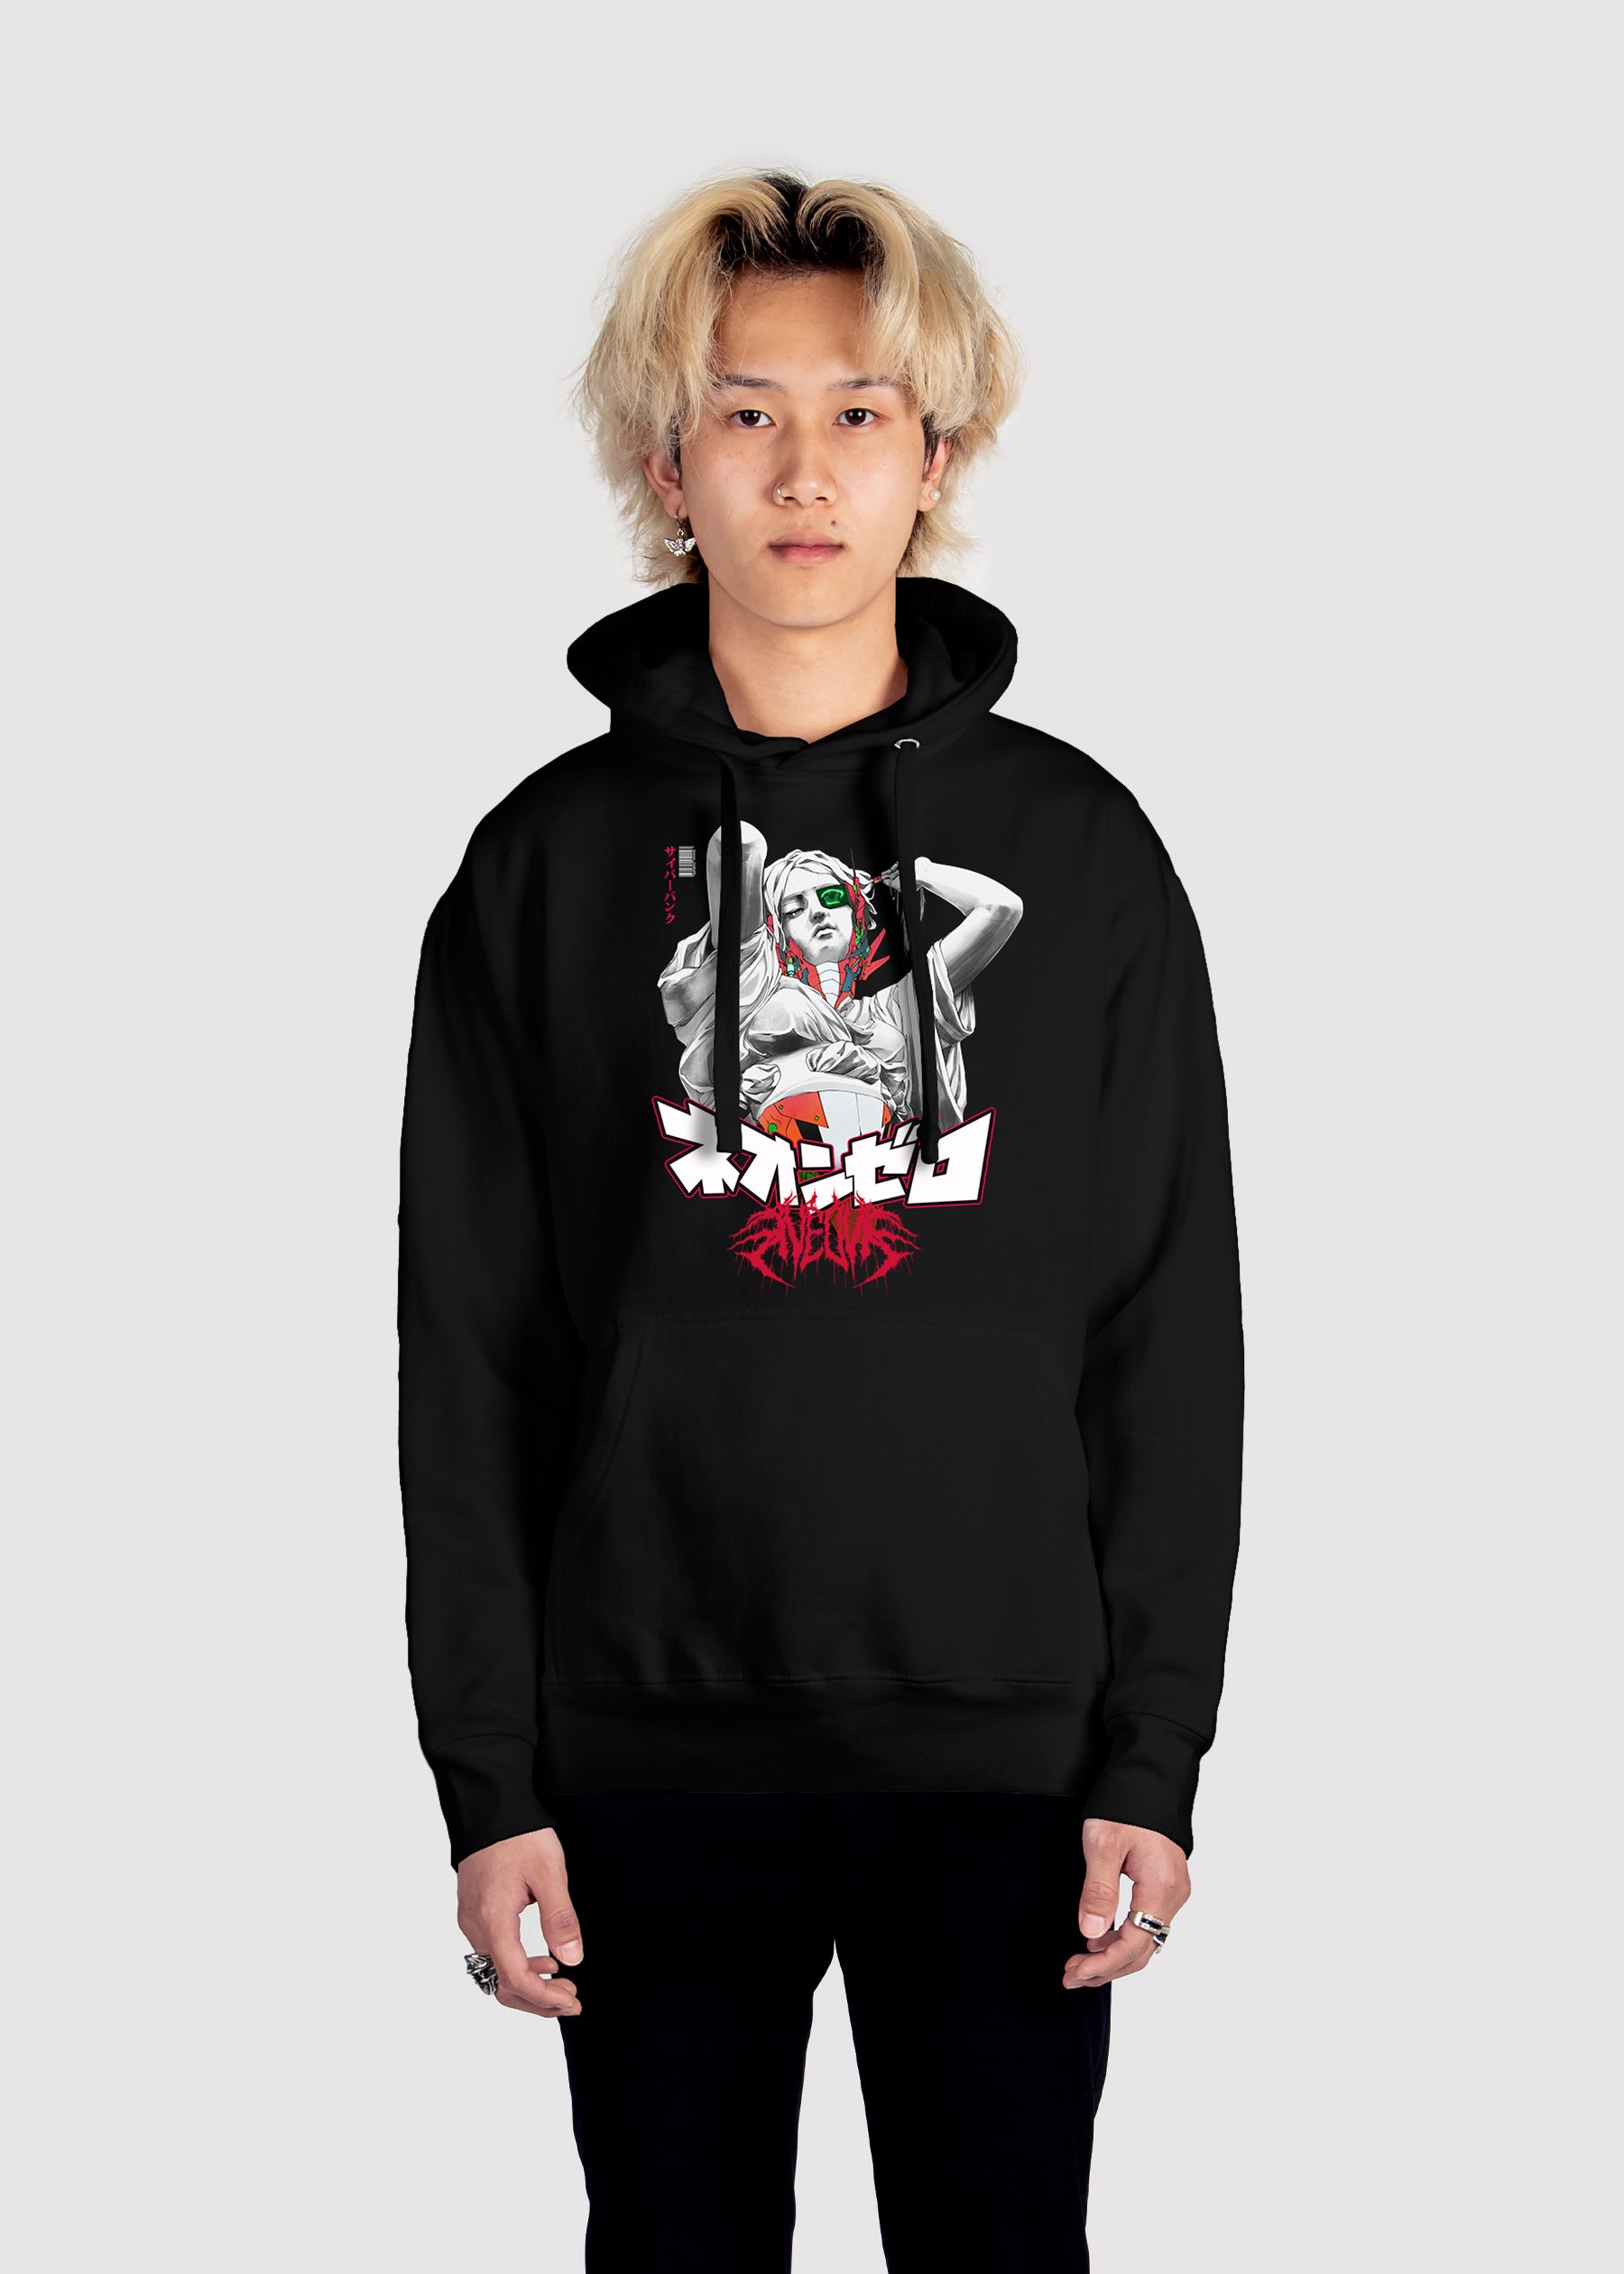 Cybervision Hoodie